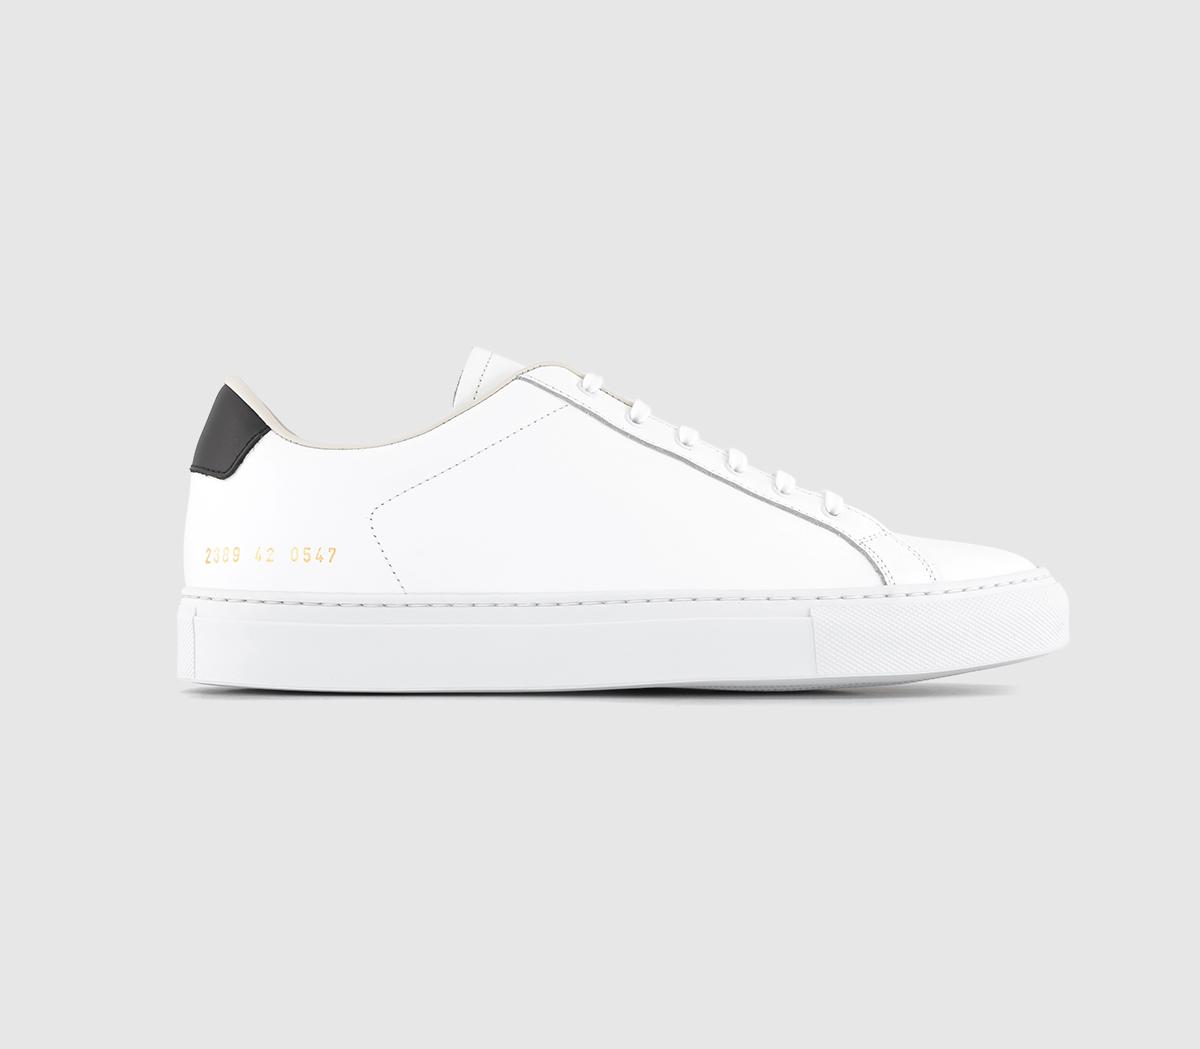 Common ProjectsRetro Classic Trainers White Black Leather